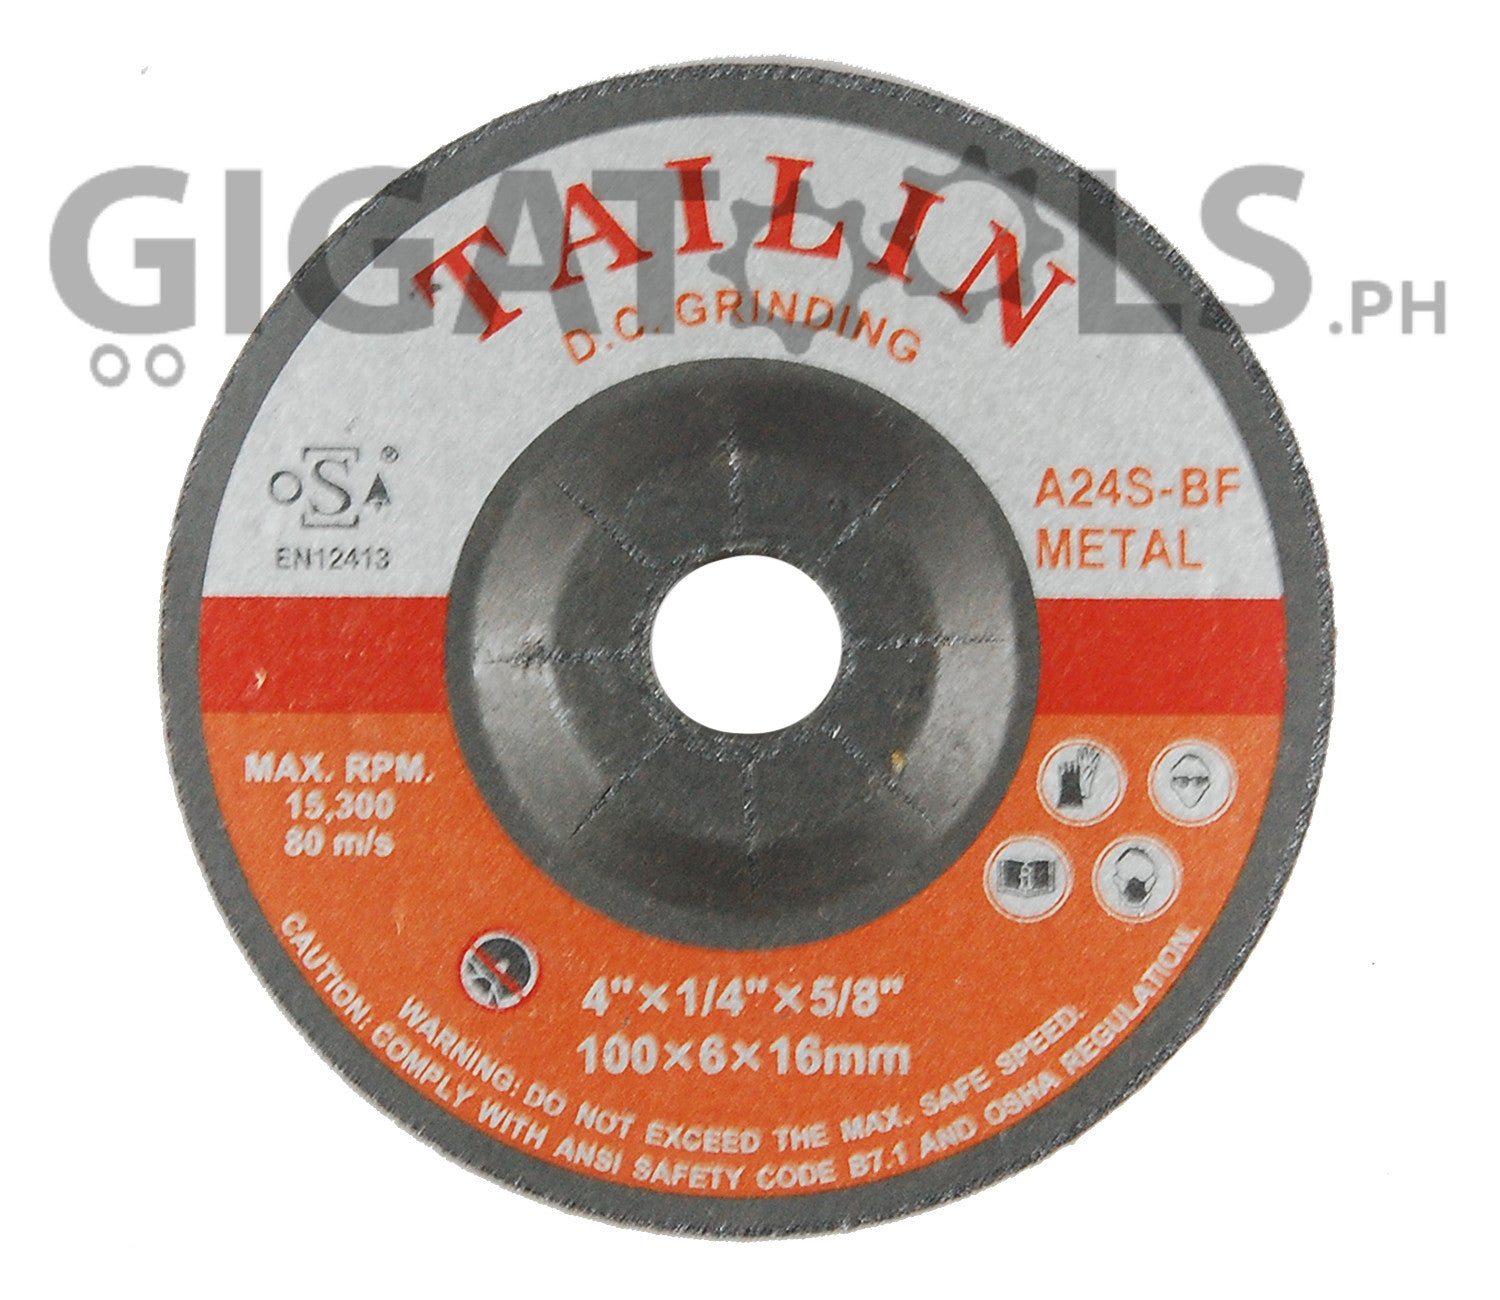 Tailin 4 Grinding Disc For Steel Gigatools Industrial Center